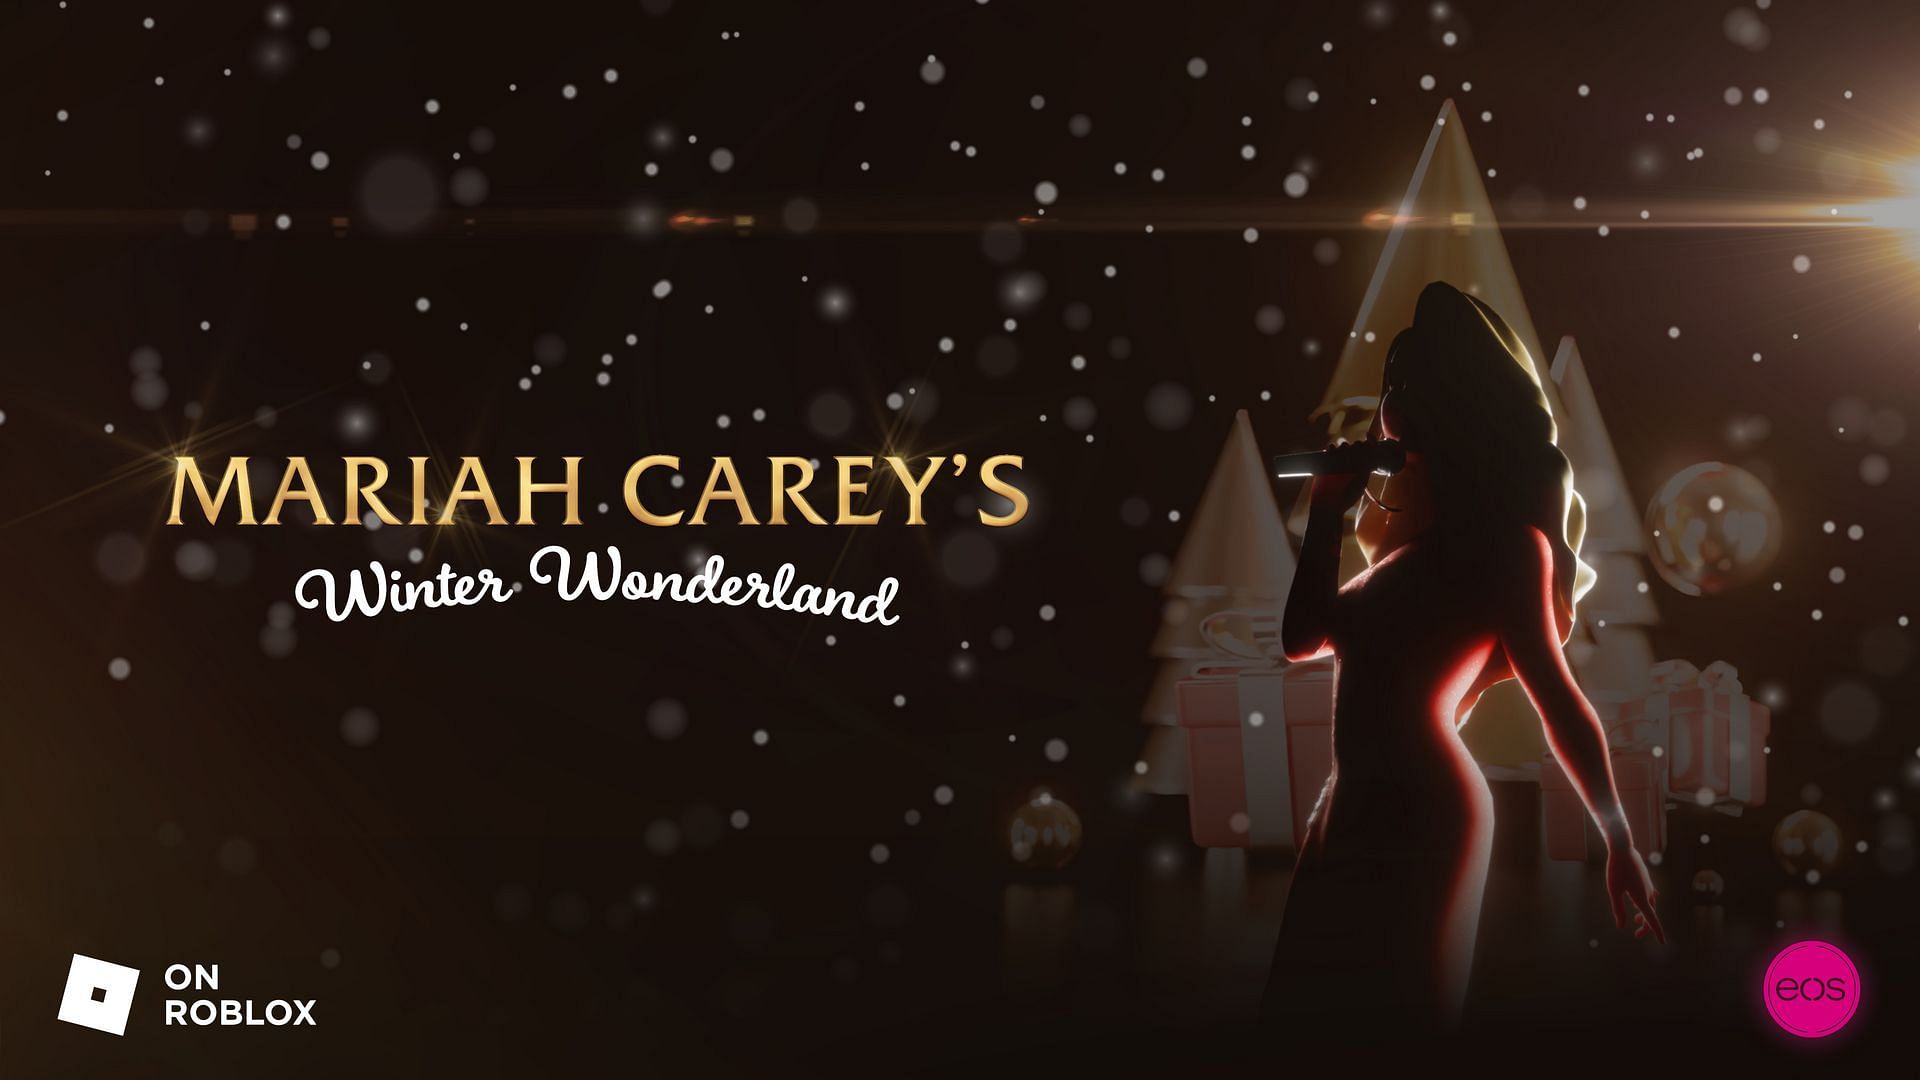 Mariah Carey made her grand appearance on the metaverse with her concert (Image via Business Wire)